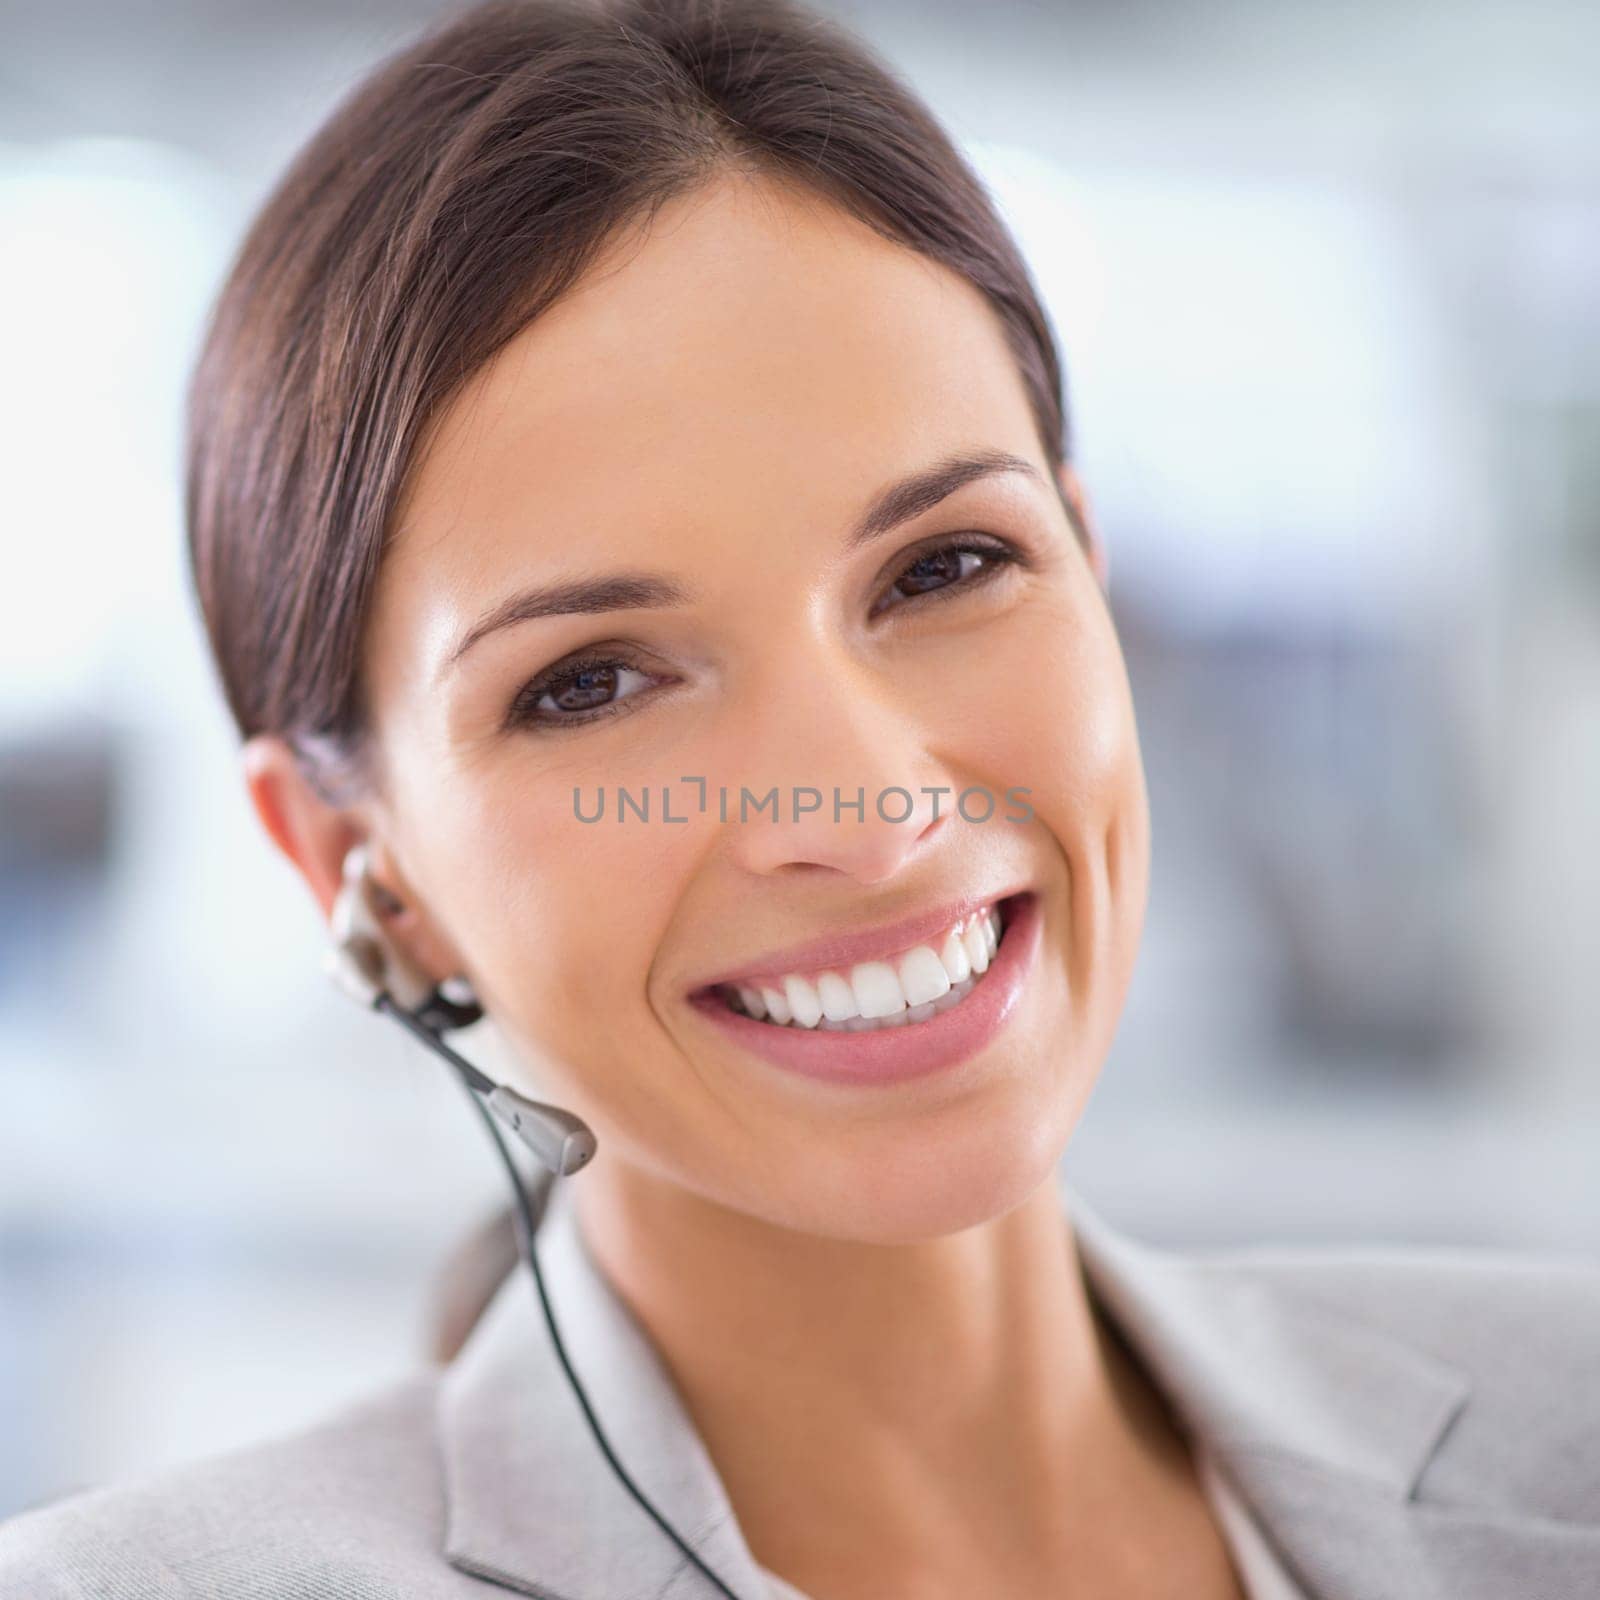 Call center, woman and portrait for telemarketing or communication with headset, happiness and contact us. Customer support, employee and face of agent with consulting, help desk and advisor at work.